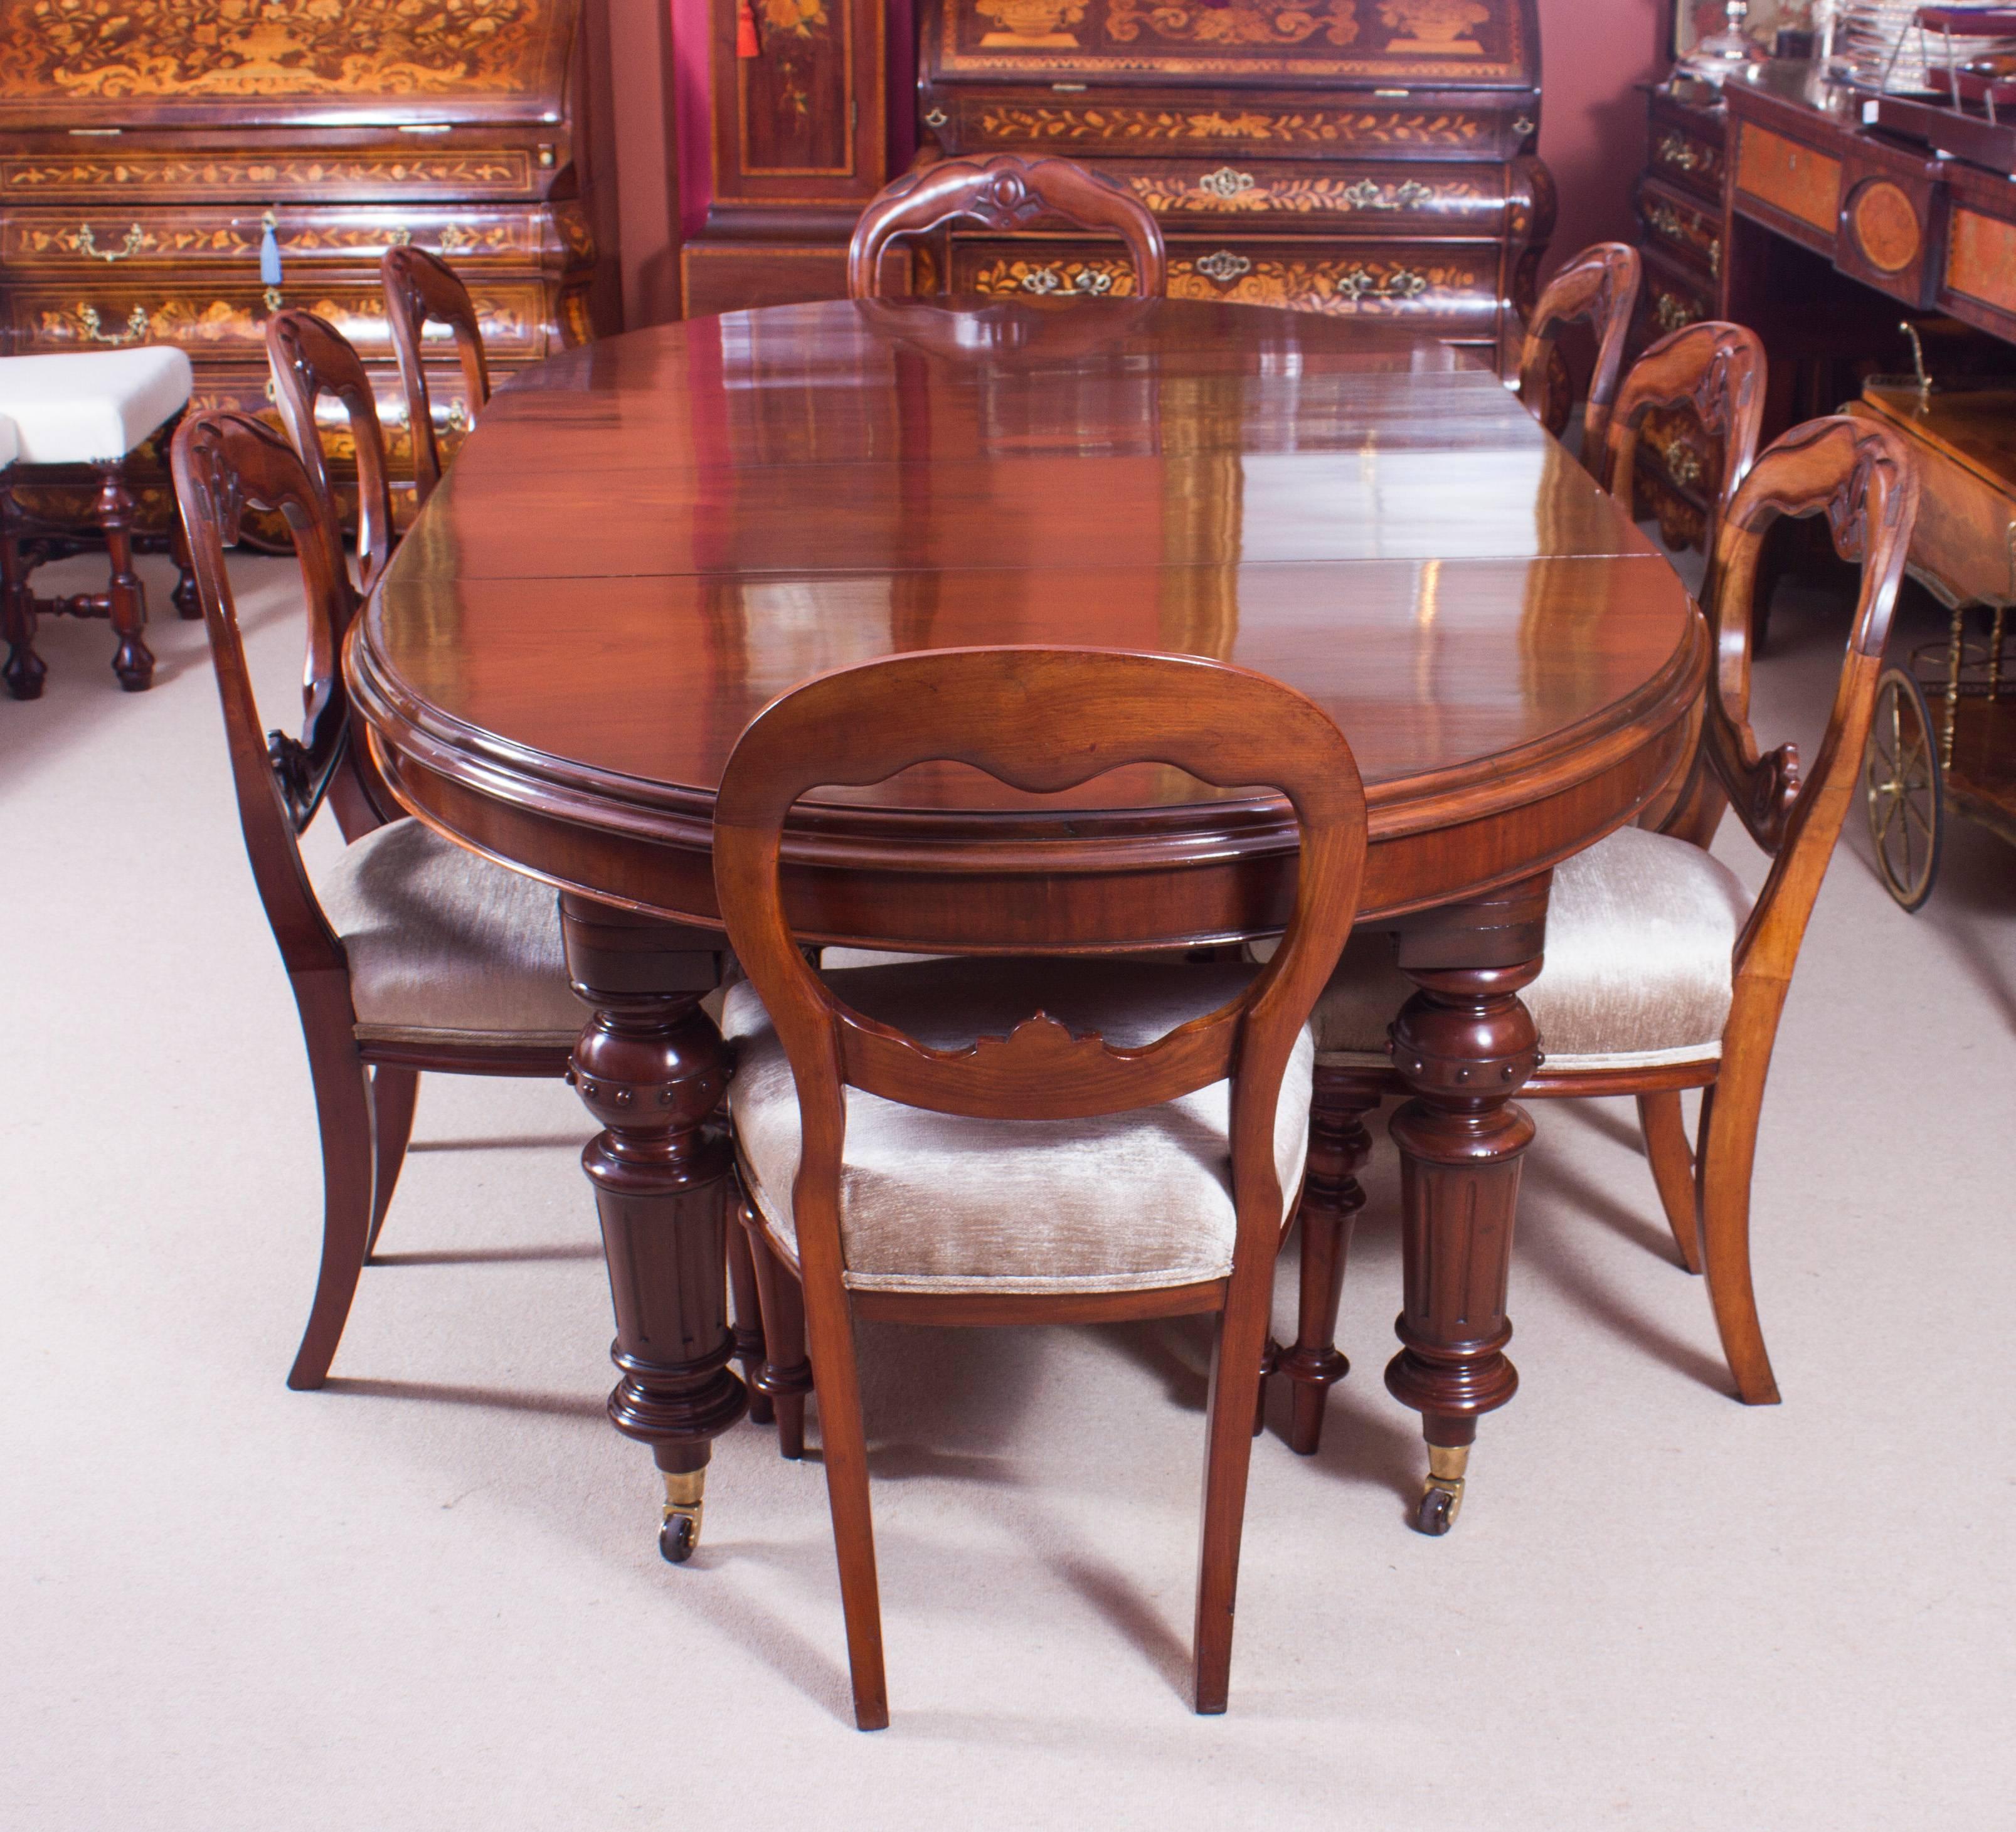 This is a fabulous dining set comprising an antique Victorian mahogany oval extending dining table, circa 1860 in date with a set of eight antique Victorian Balloon Back dining chairs also circa 1870 in date.

The table has two original leaves and